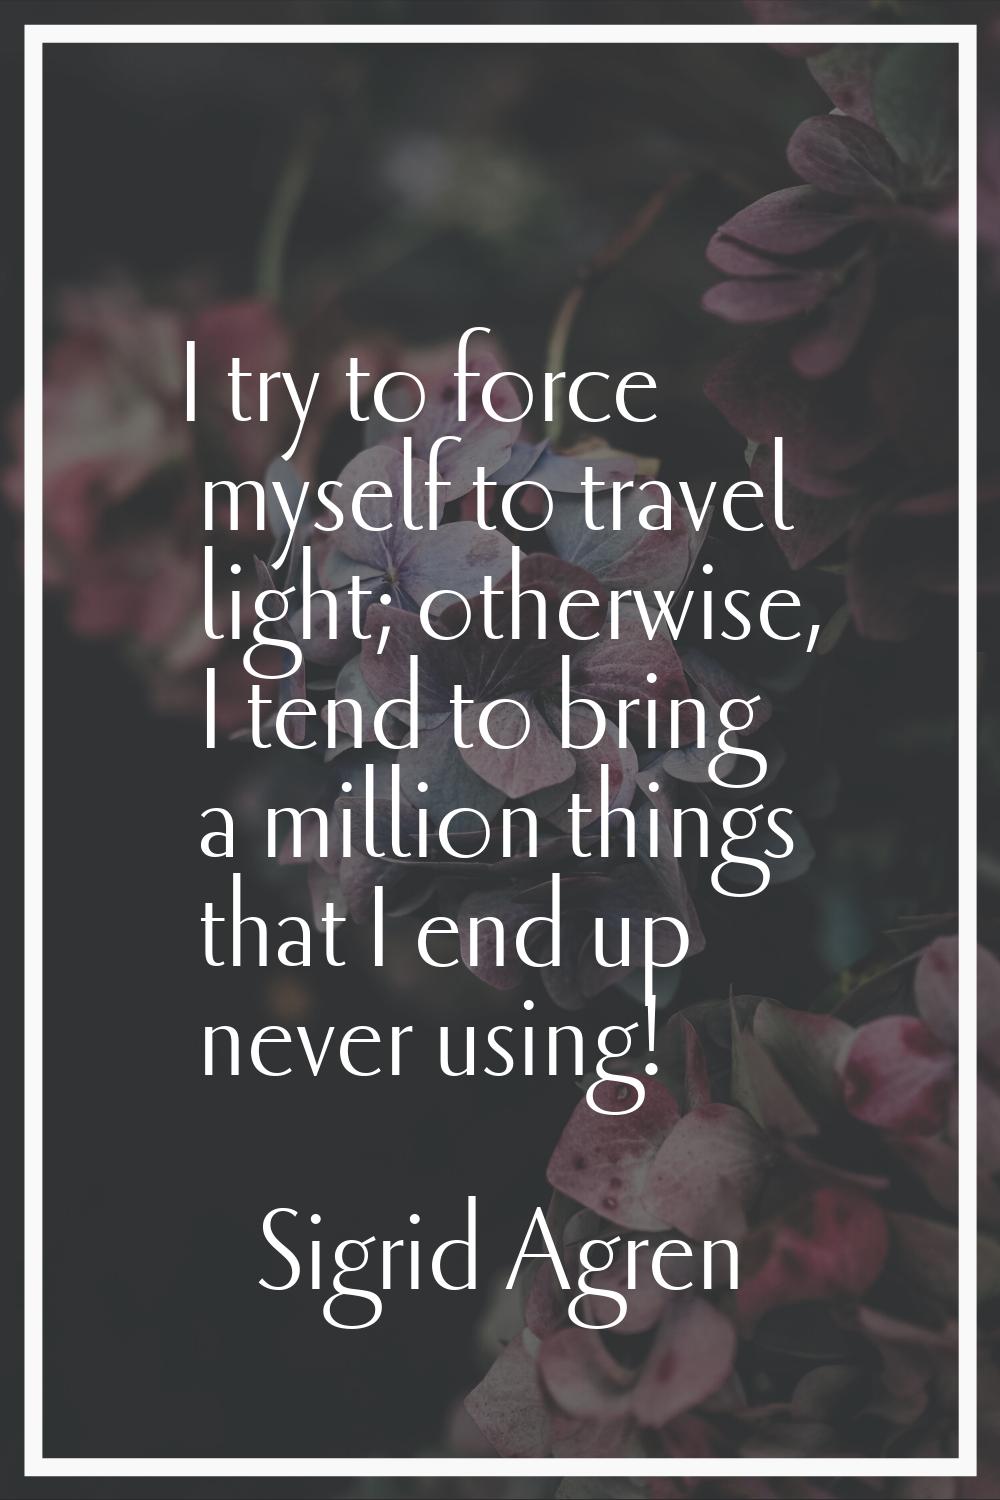 I try to force myself to travel light; otherwise, I tend to bring a million things that I end up ne